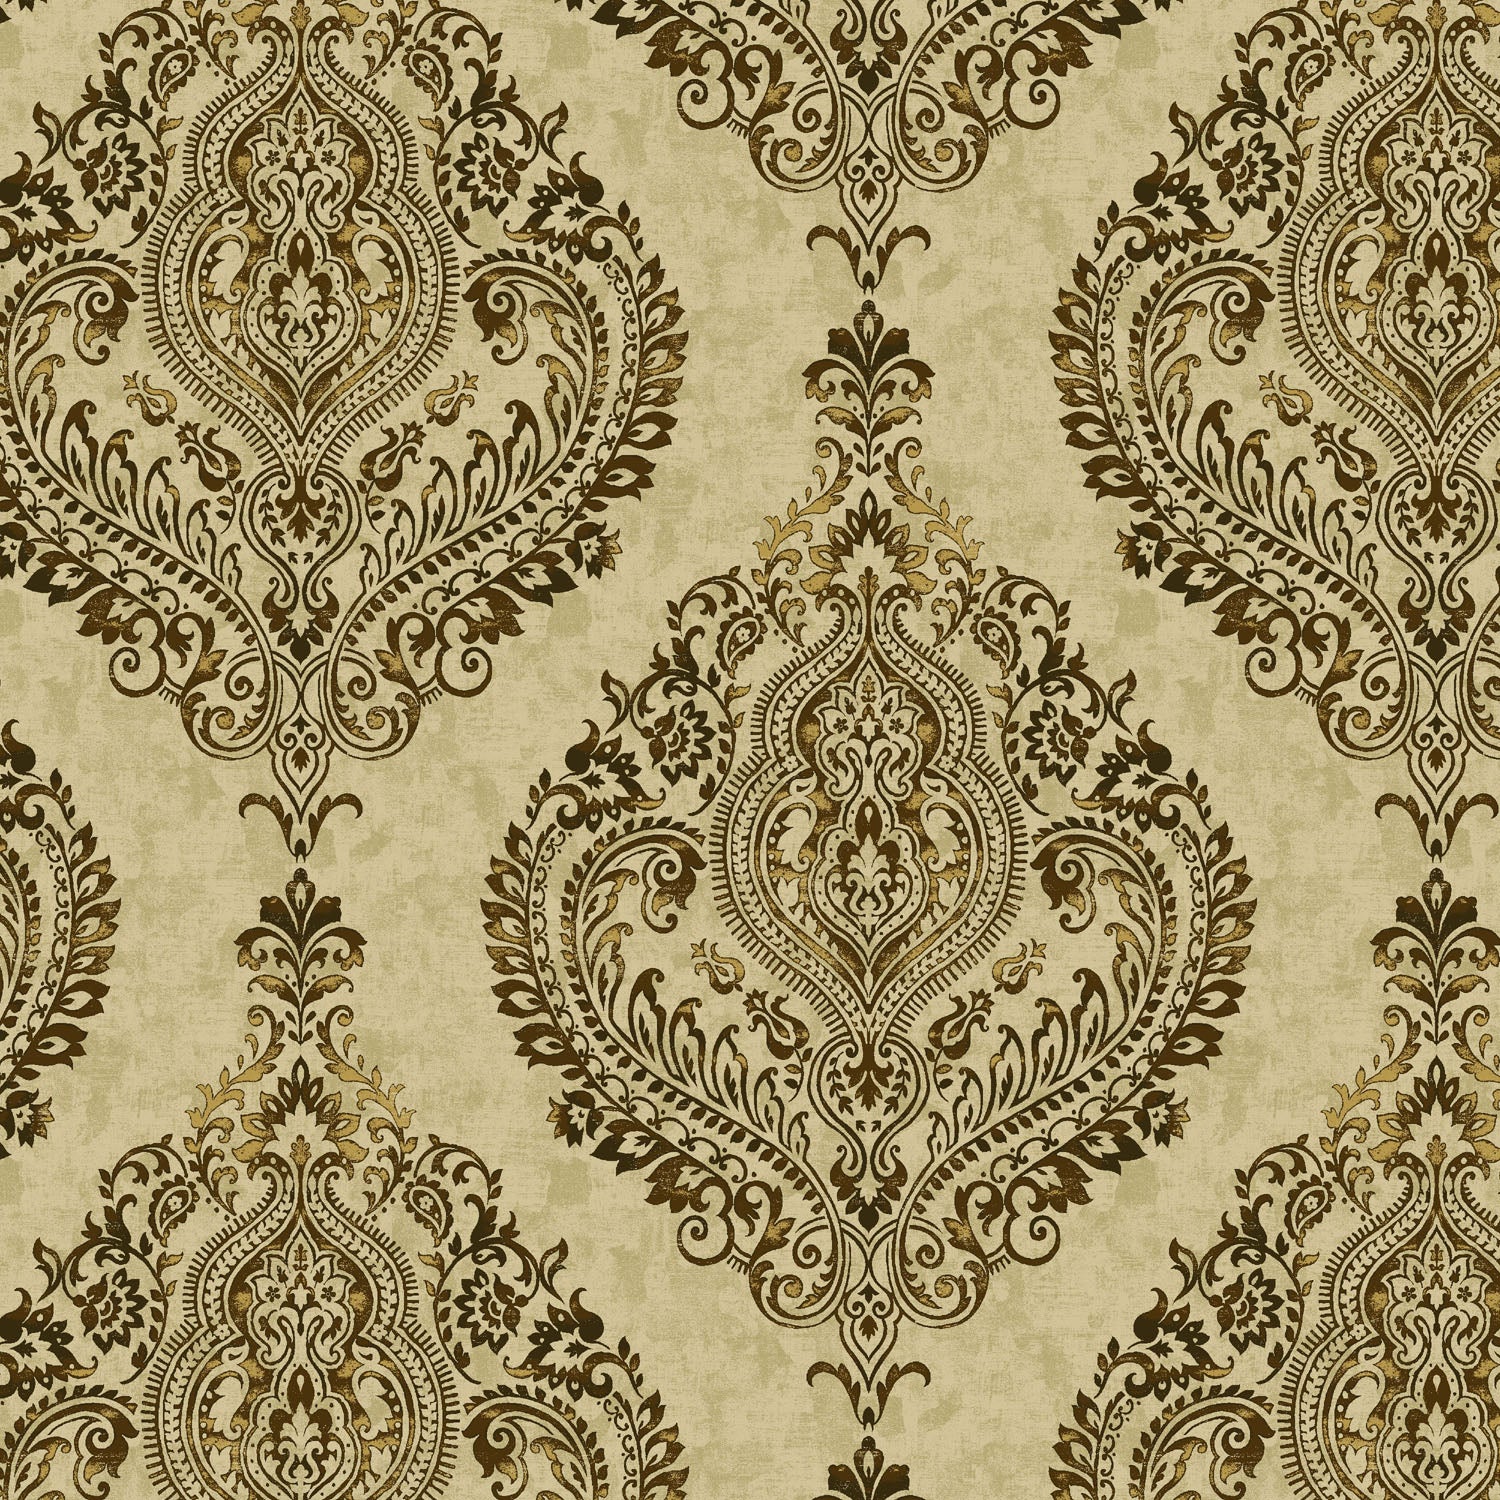 Waverly Inspirations Cotton Duck 54" Large Damask Chai Color Sewing Fabric by the Yard